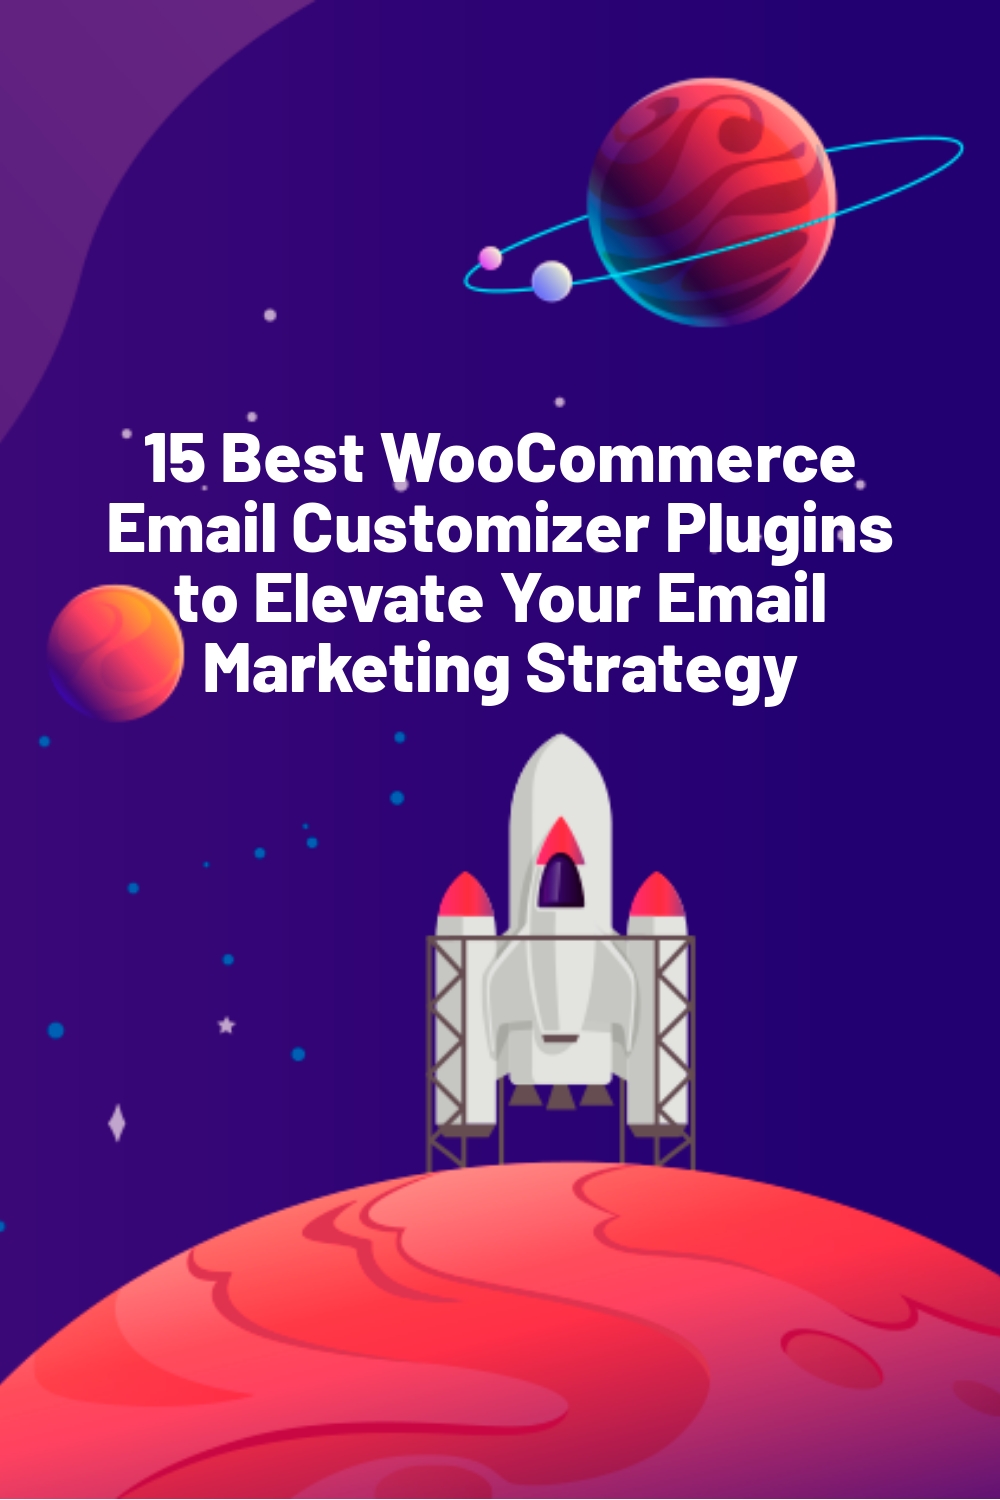 15 Best WooCommerce Email Customizer Plugins to Elevate Your Email Marketing Strategy